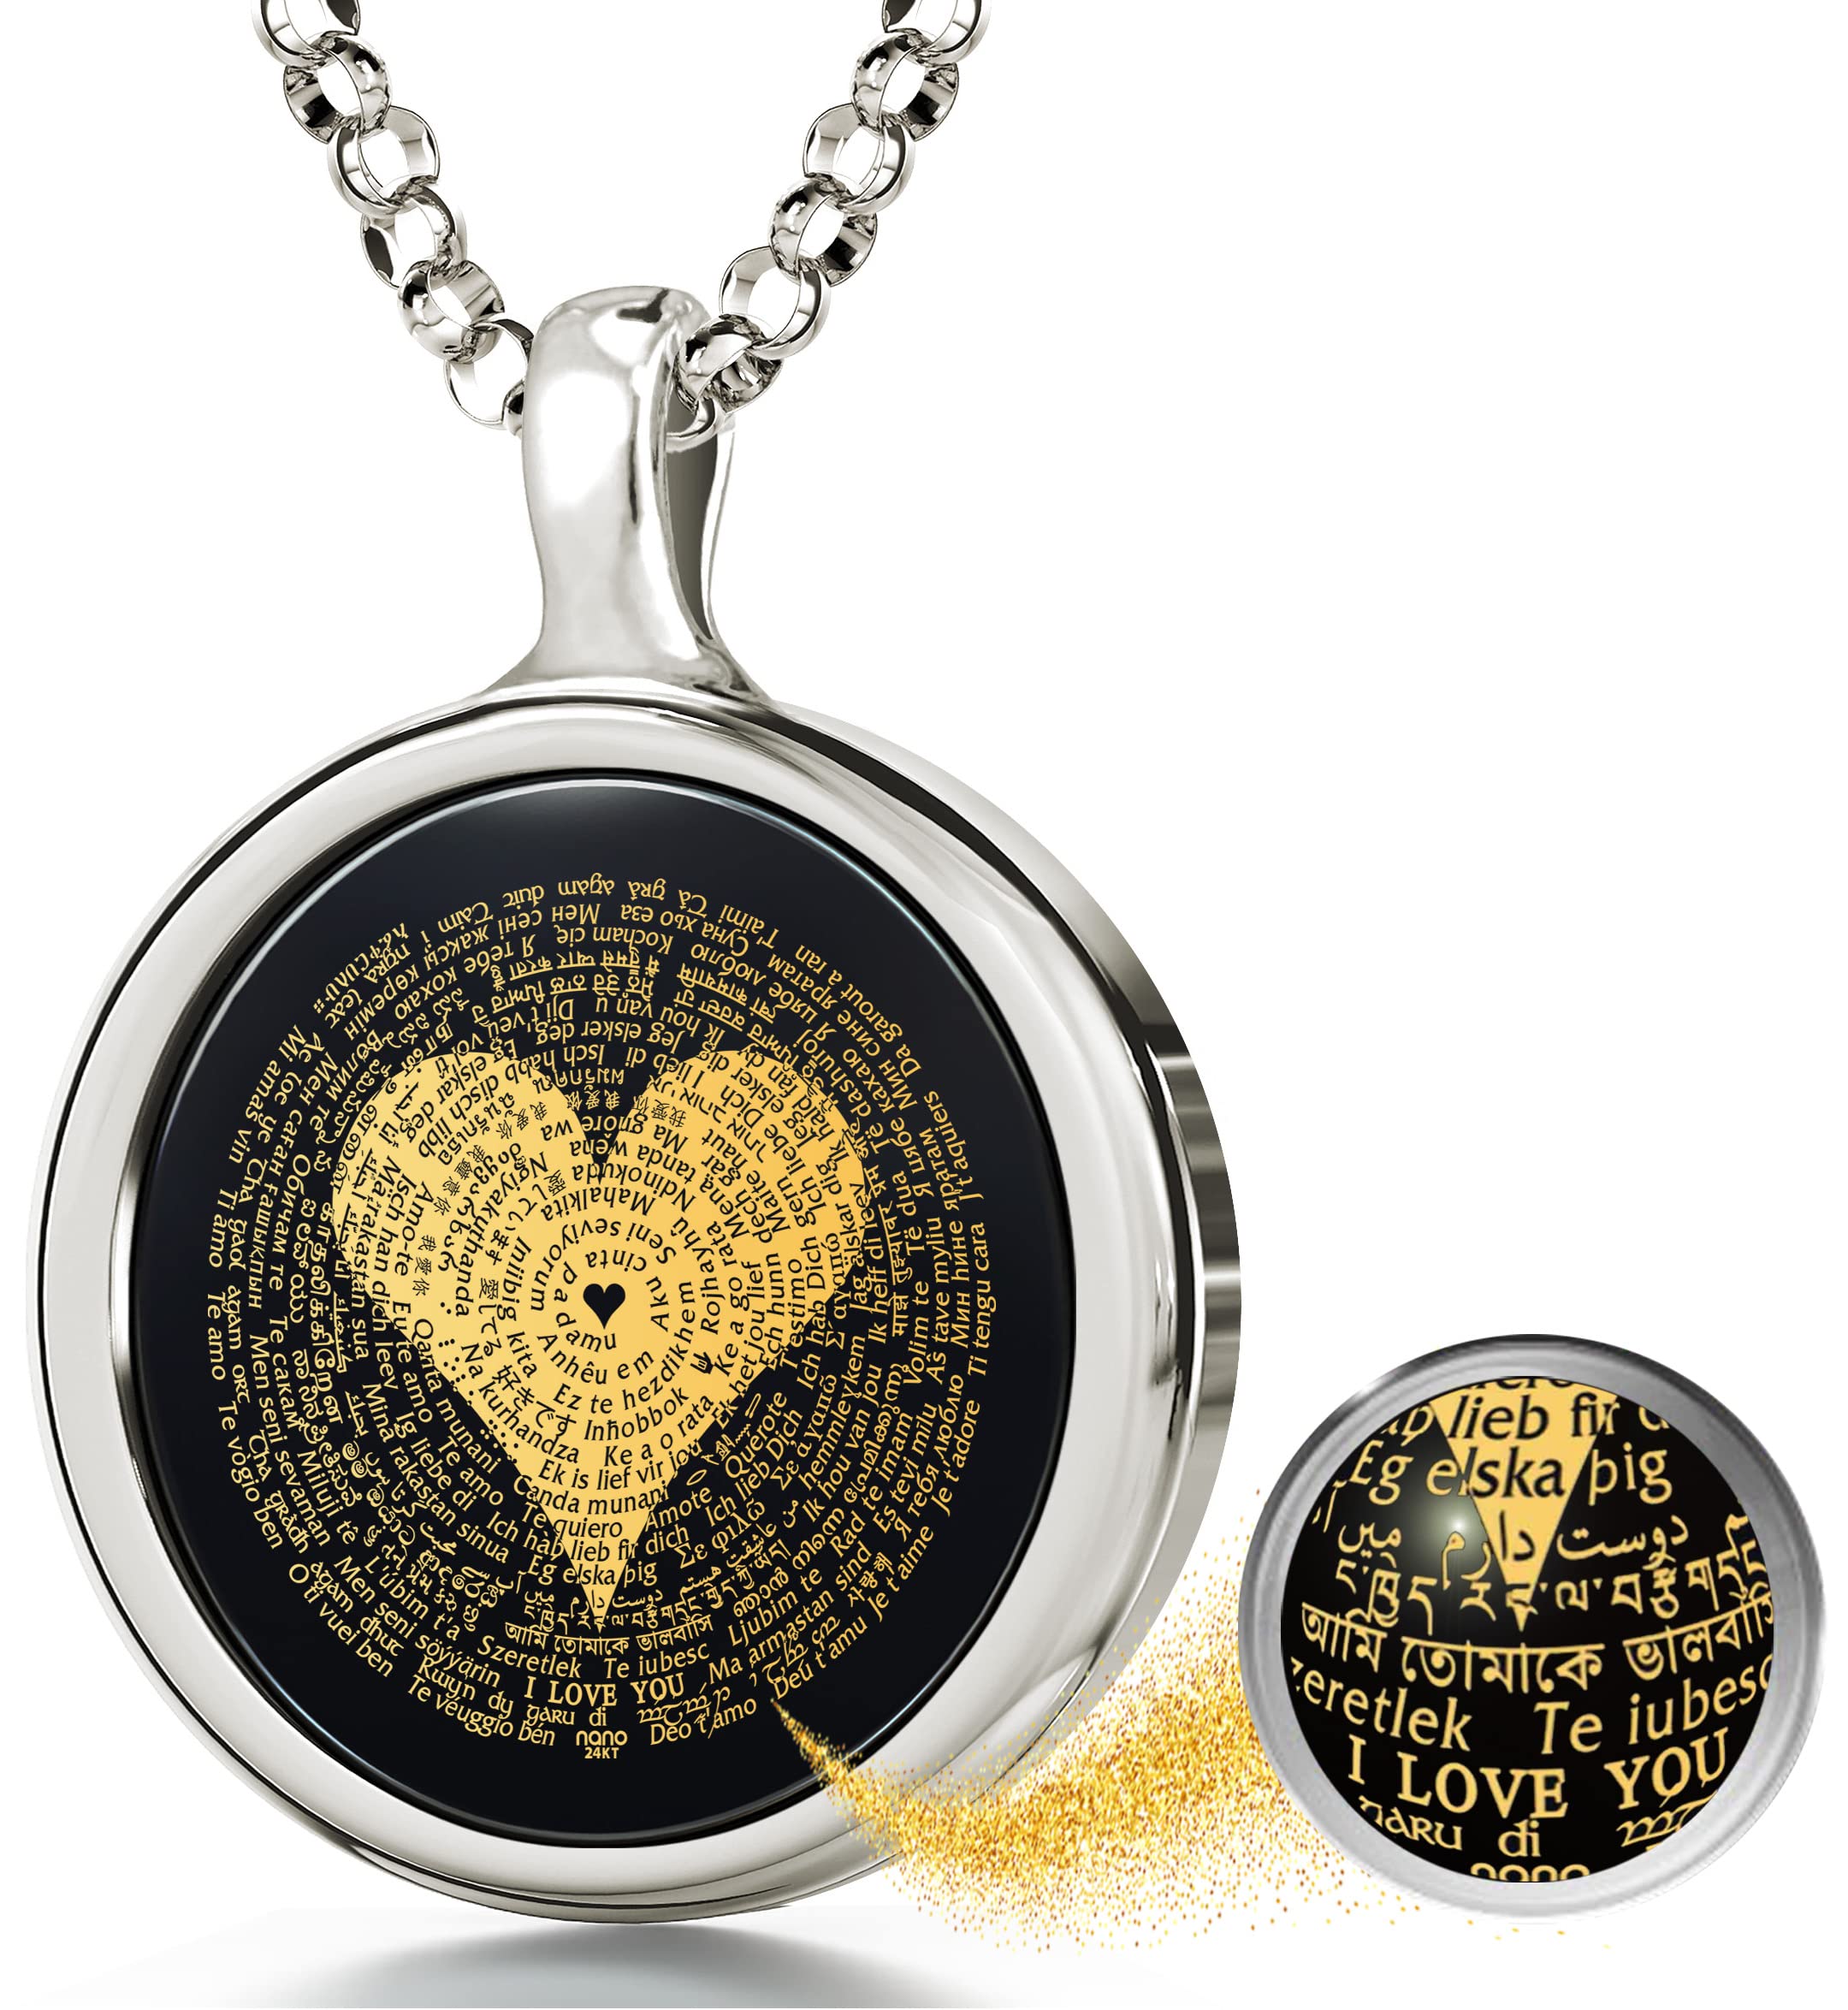 NanoStyle I Love You Necklace Inscribed with the Romantic Words in 120 Different Languages in Miniature Text of Pure Gold on Onyx Pendant for Women, 18